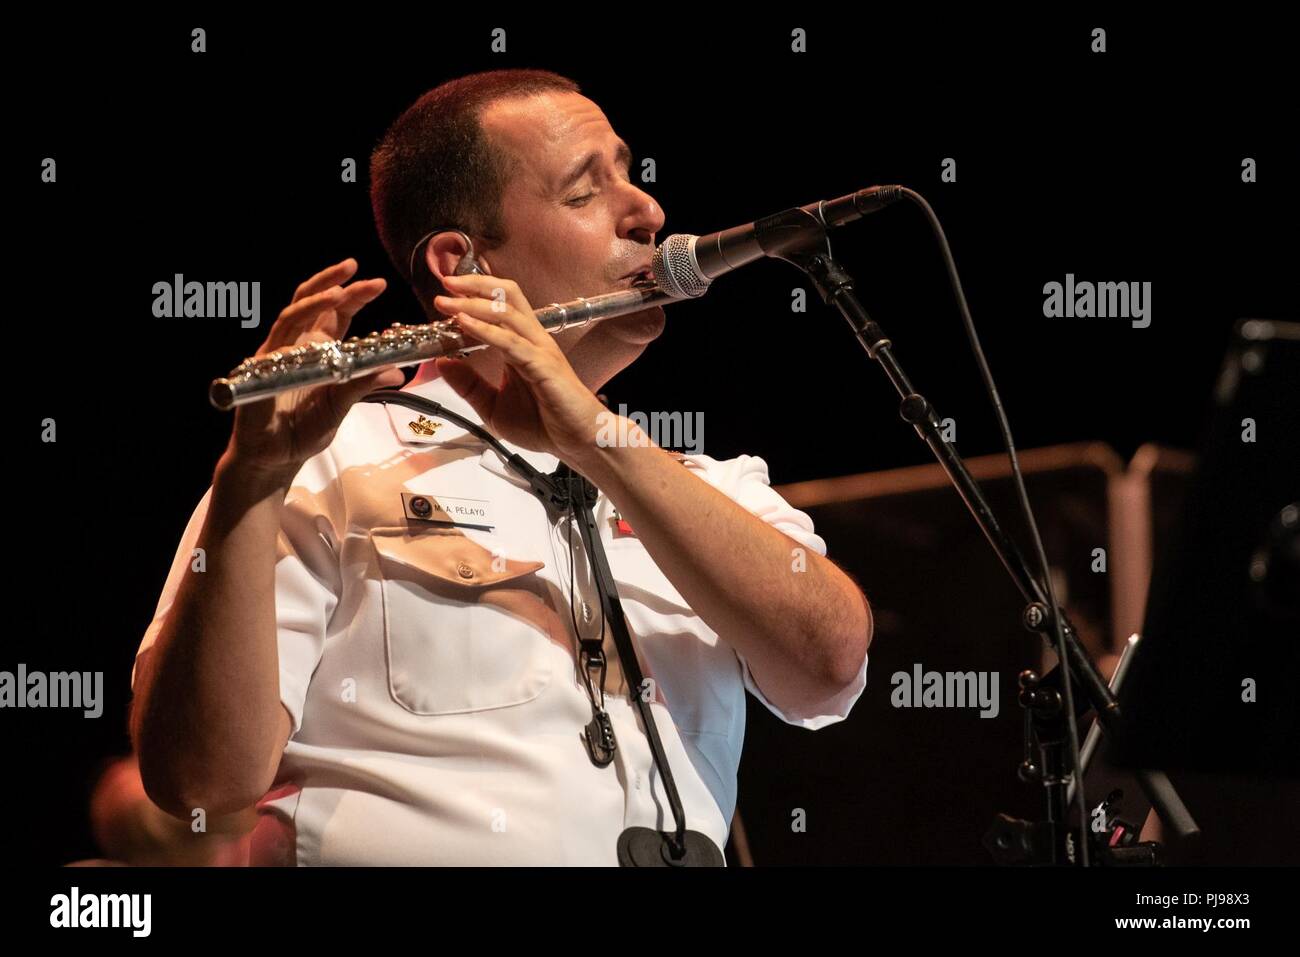 DAVIE, Fla. (July 8, 2018) Musician 1st Class Manuel Pelayo de Gongora performs with the U.S. Navy Band Cruisers popular music group during a concert at Broward College's Bailey Hall in Davie, Fla. The Navy Band performed in seven cities in Florida, connecting communities to the Navy and building awareness and support for the Navy. Stock Photo